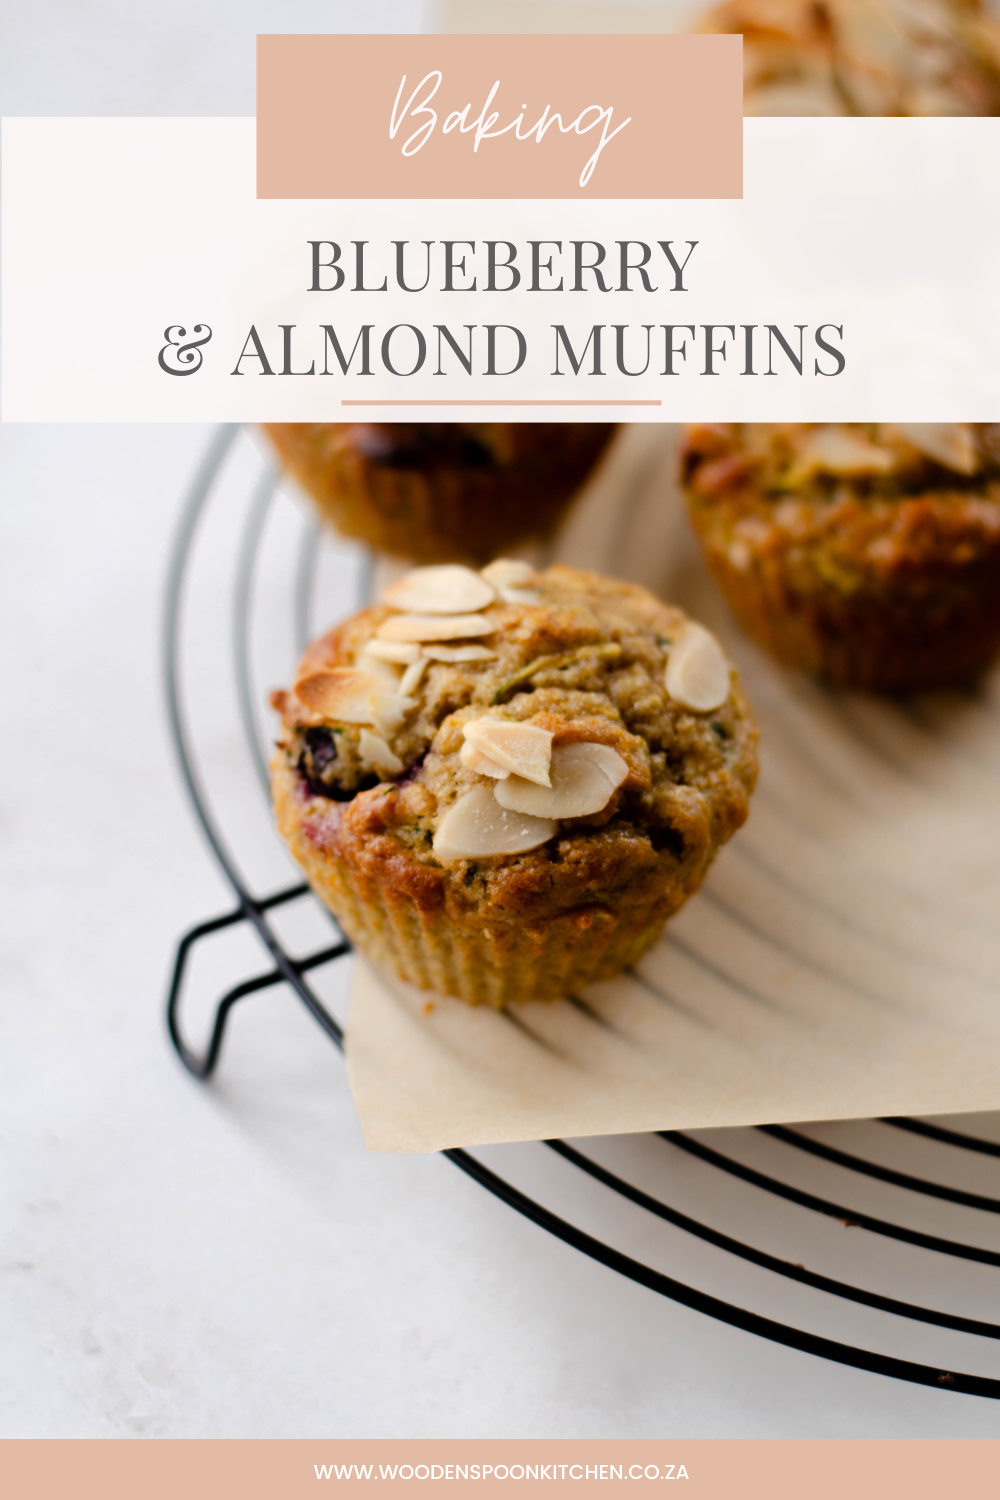 Blueberry and almond muffins